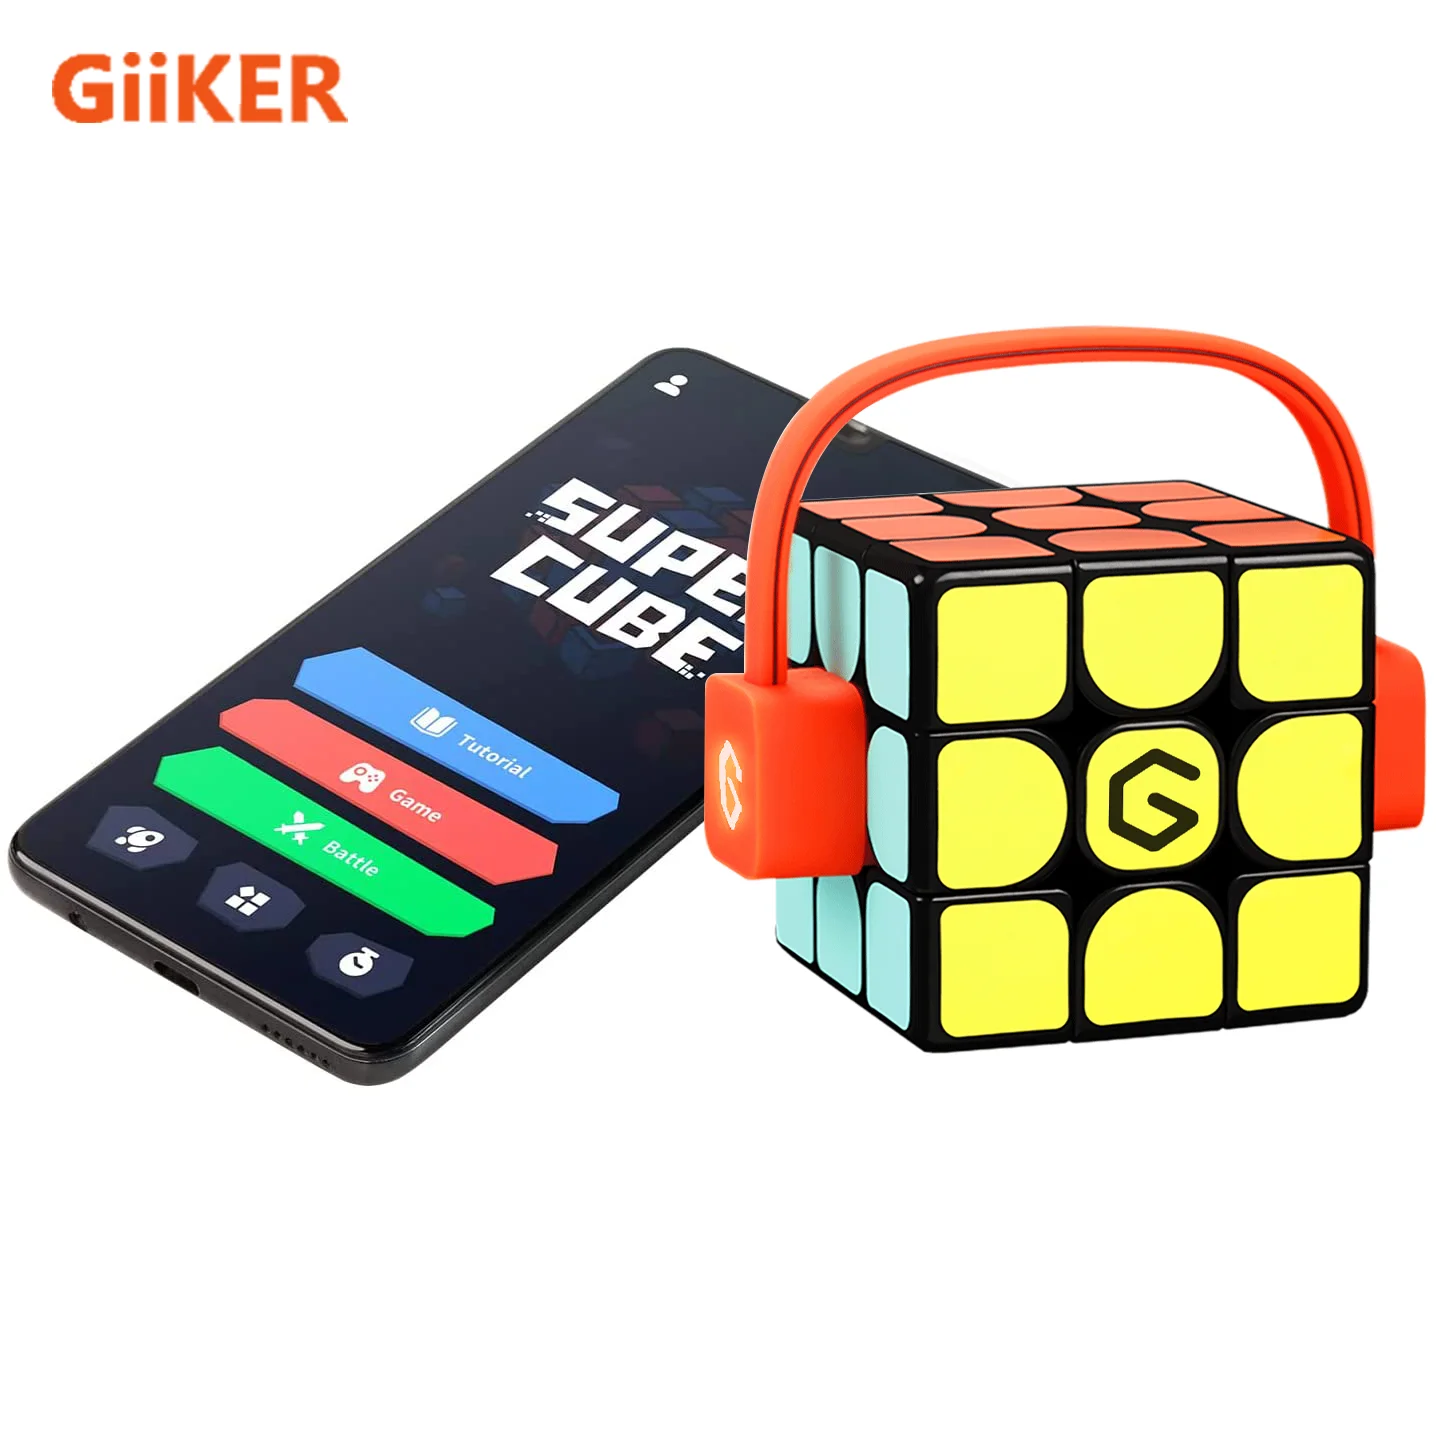 

GiiKER Electronic Bluetooth Speed Cube Real-time Connected STEM Smart Cube 3x3 Companion App Support Online Battle with Cubers